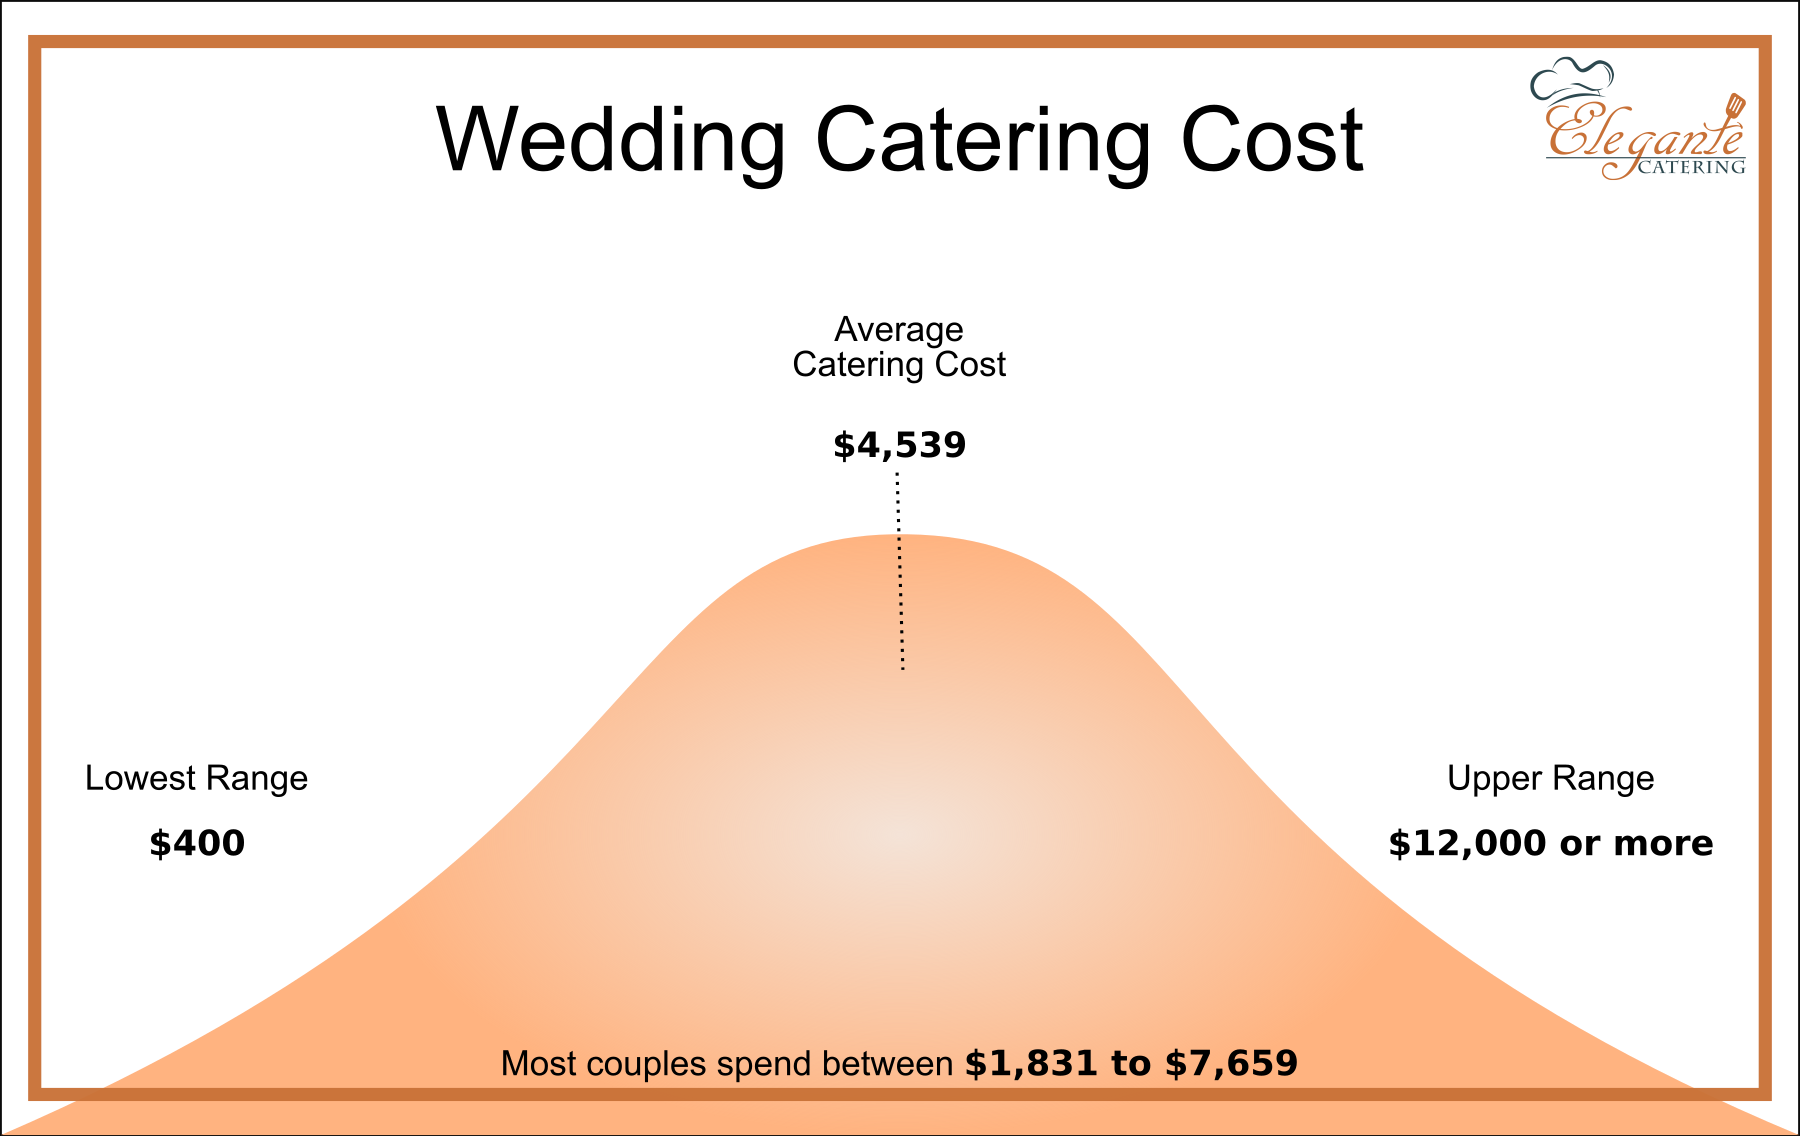 Wedding catering cost